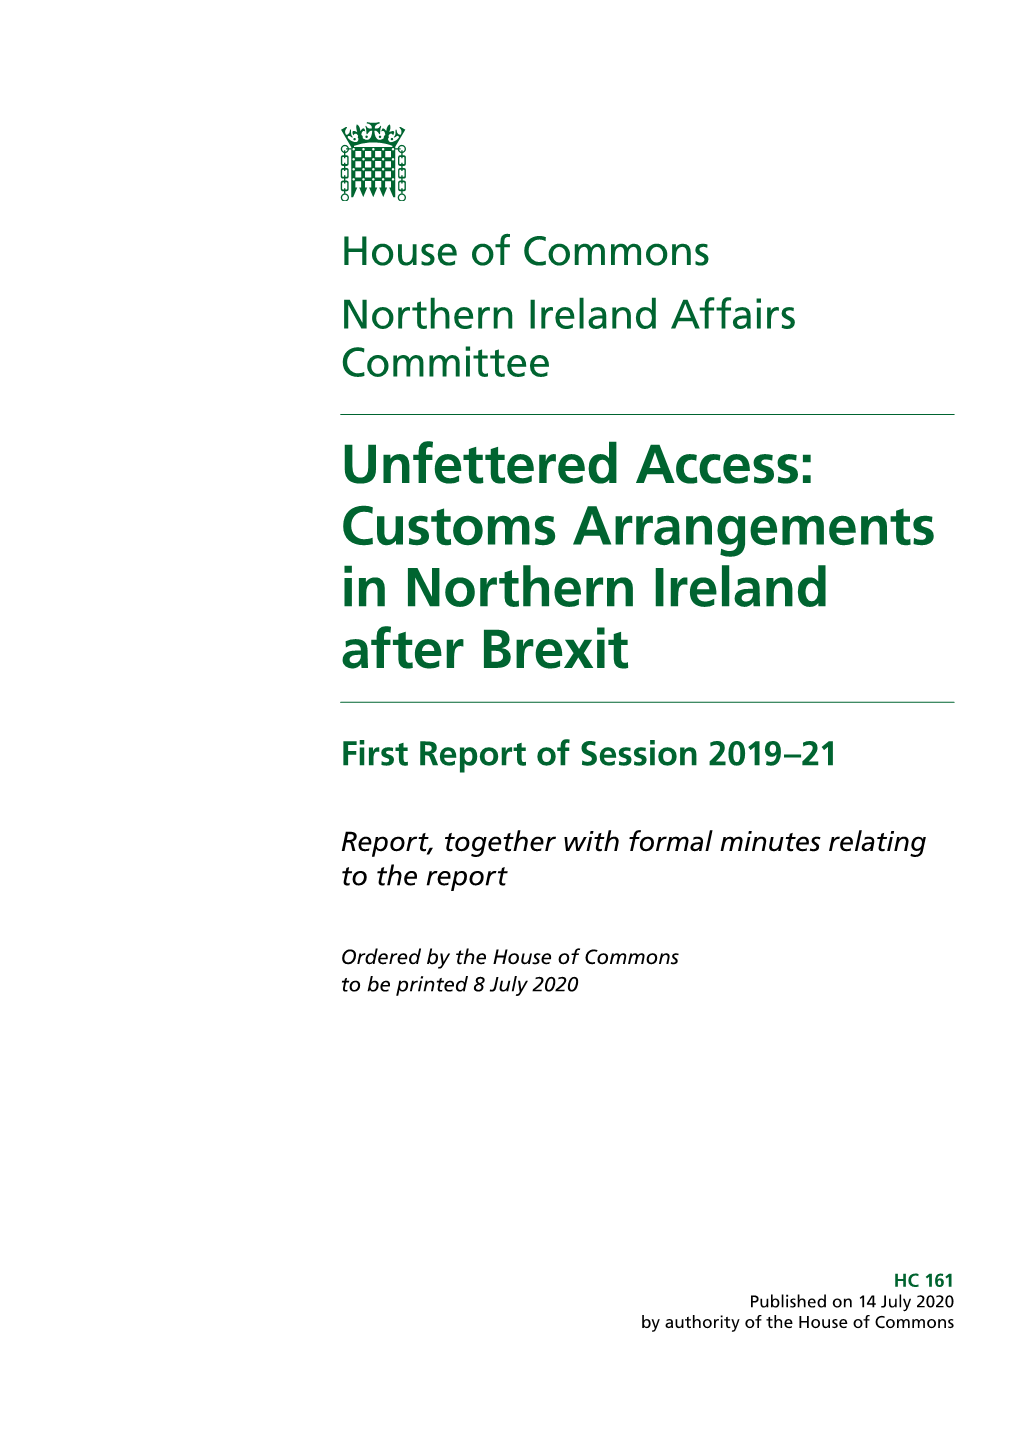 Unfettered Access: Northern Ireland and Customs Arrangements After Brexit